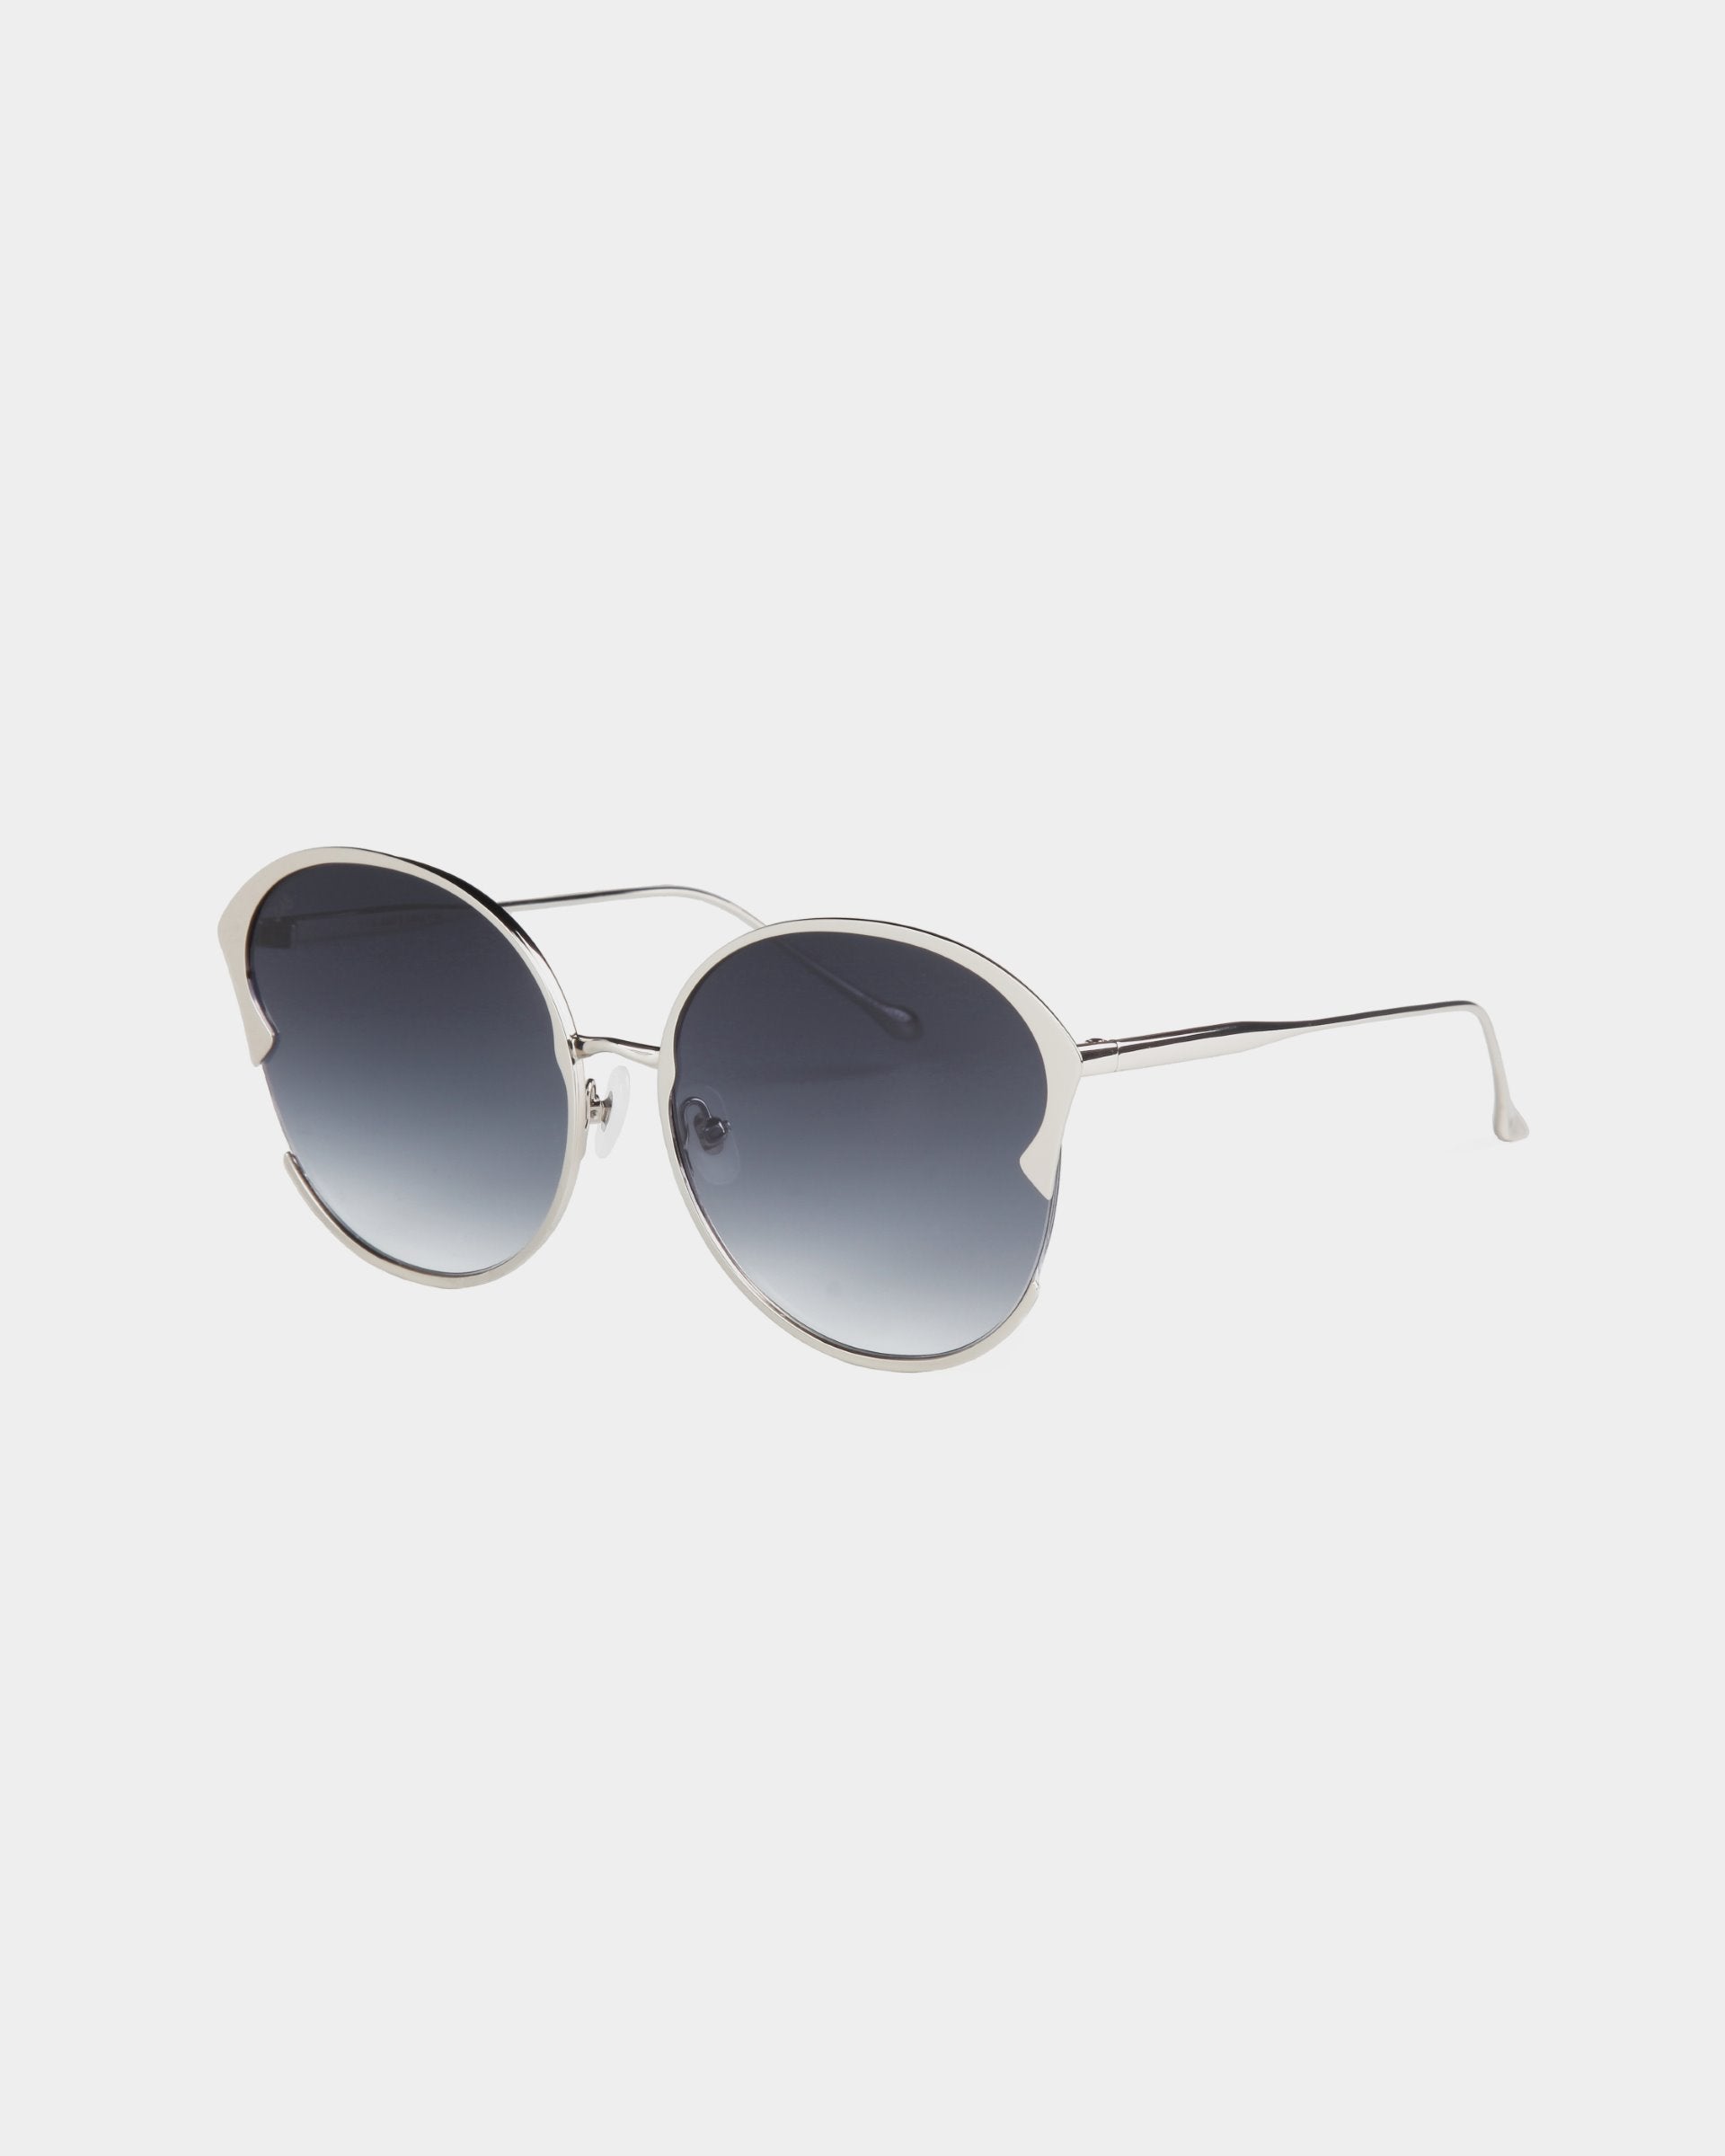 A pair of stylish round Alectrona sunglasses by For Art's Sake® with silver frames and dark gradient, shatter-resistant lenses. The temples are thin and metallic with a slight curve at the ends. The design includes adjustable jade nose pads and a unique cut-out detail at the top corners of the lenses.